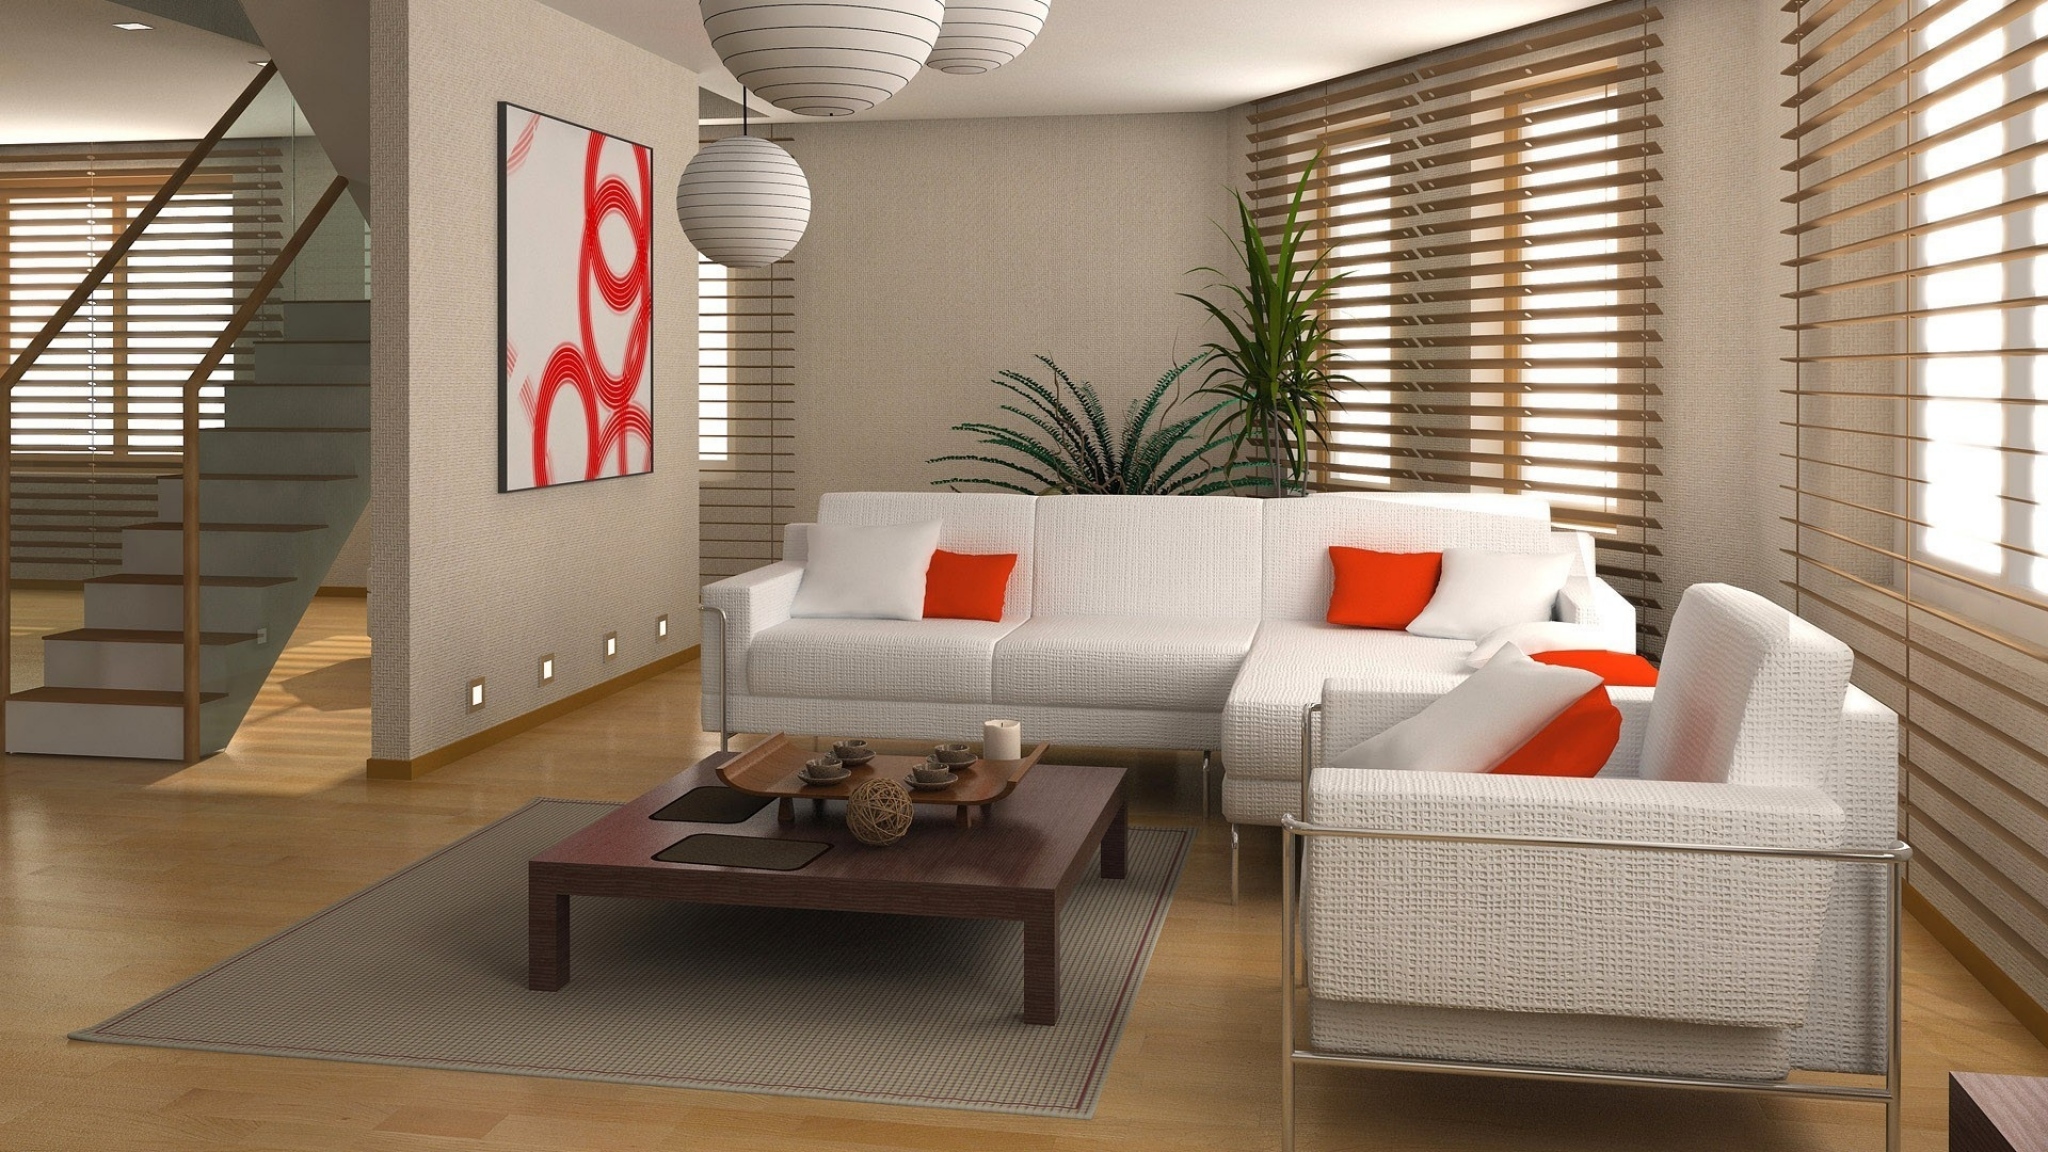 Living Room Decorating With White Sofa - HD Wallpaper 